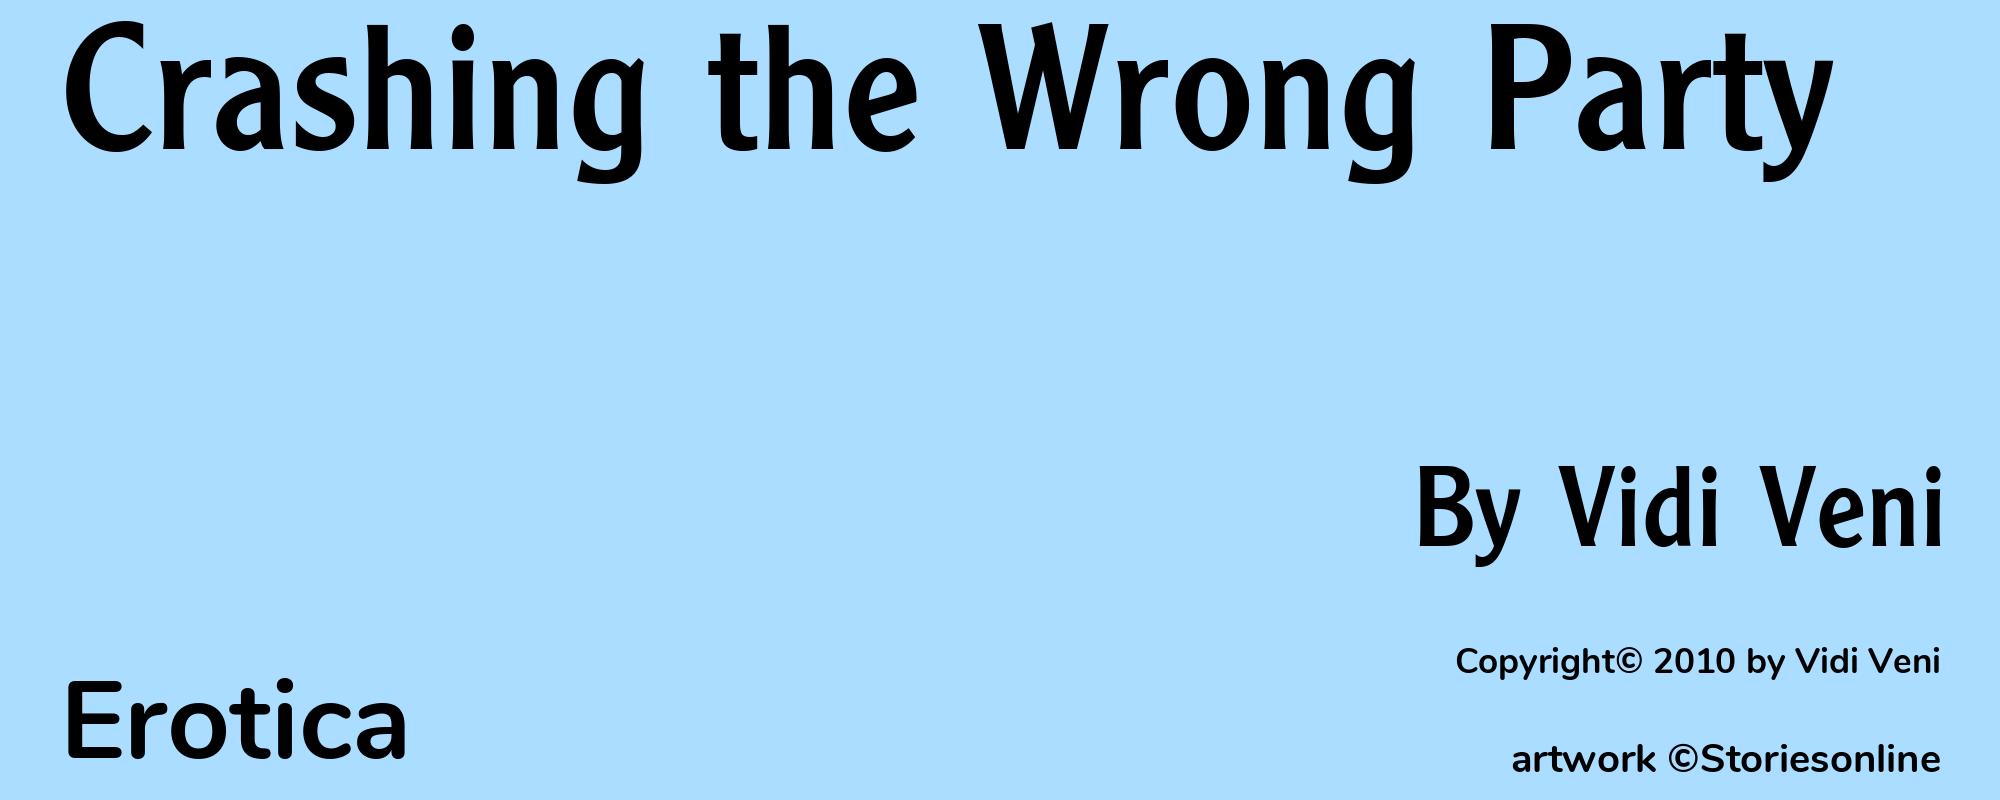 Crashing the Wrong Party - Cover